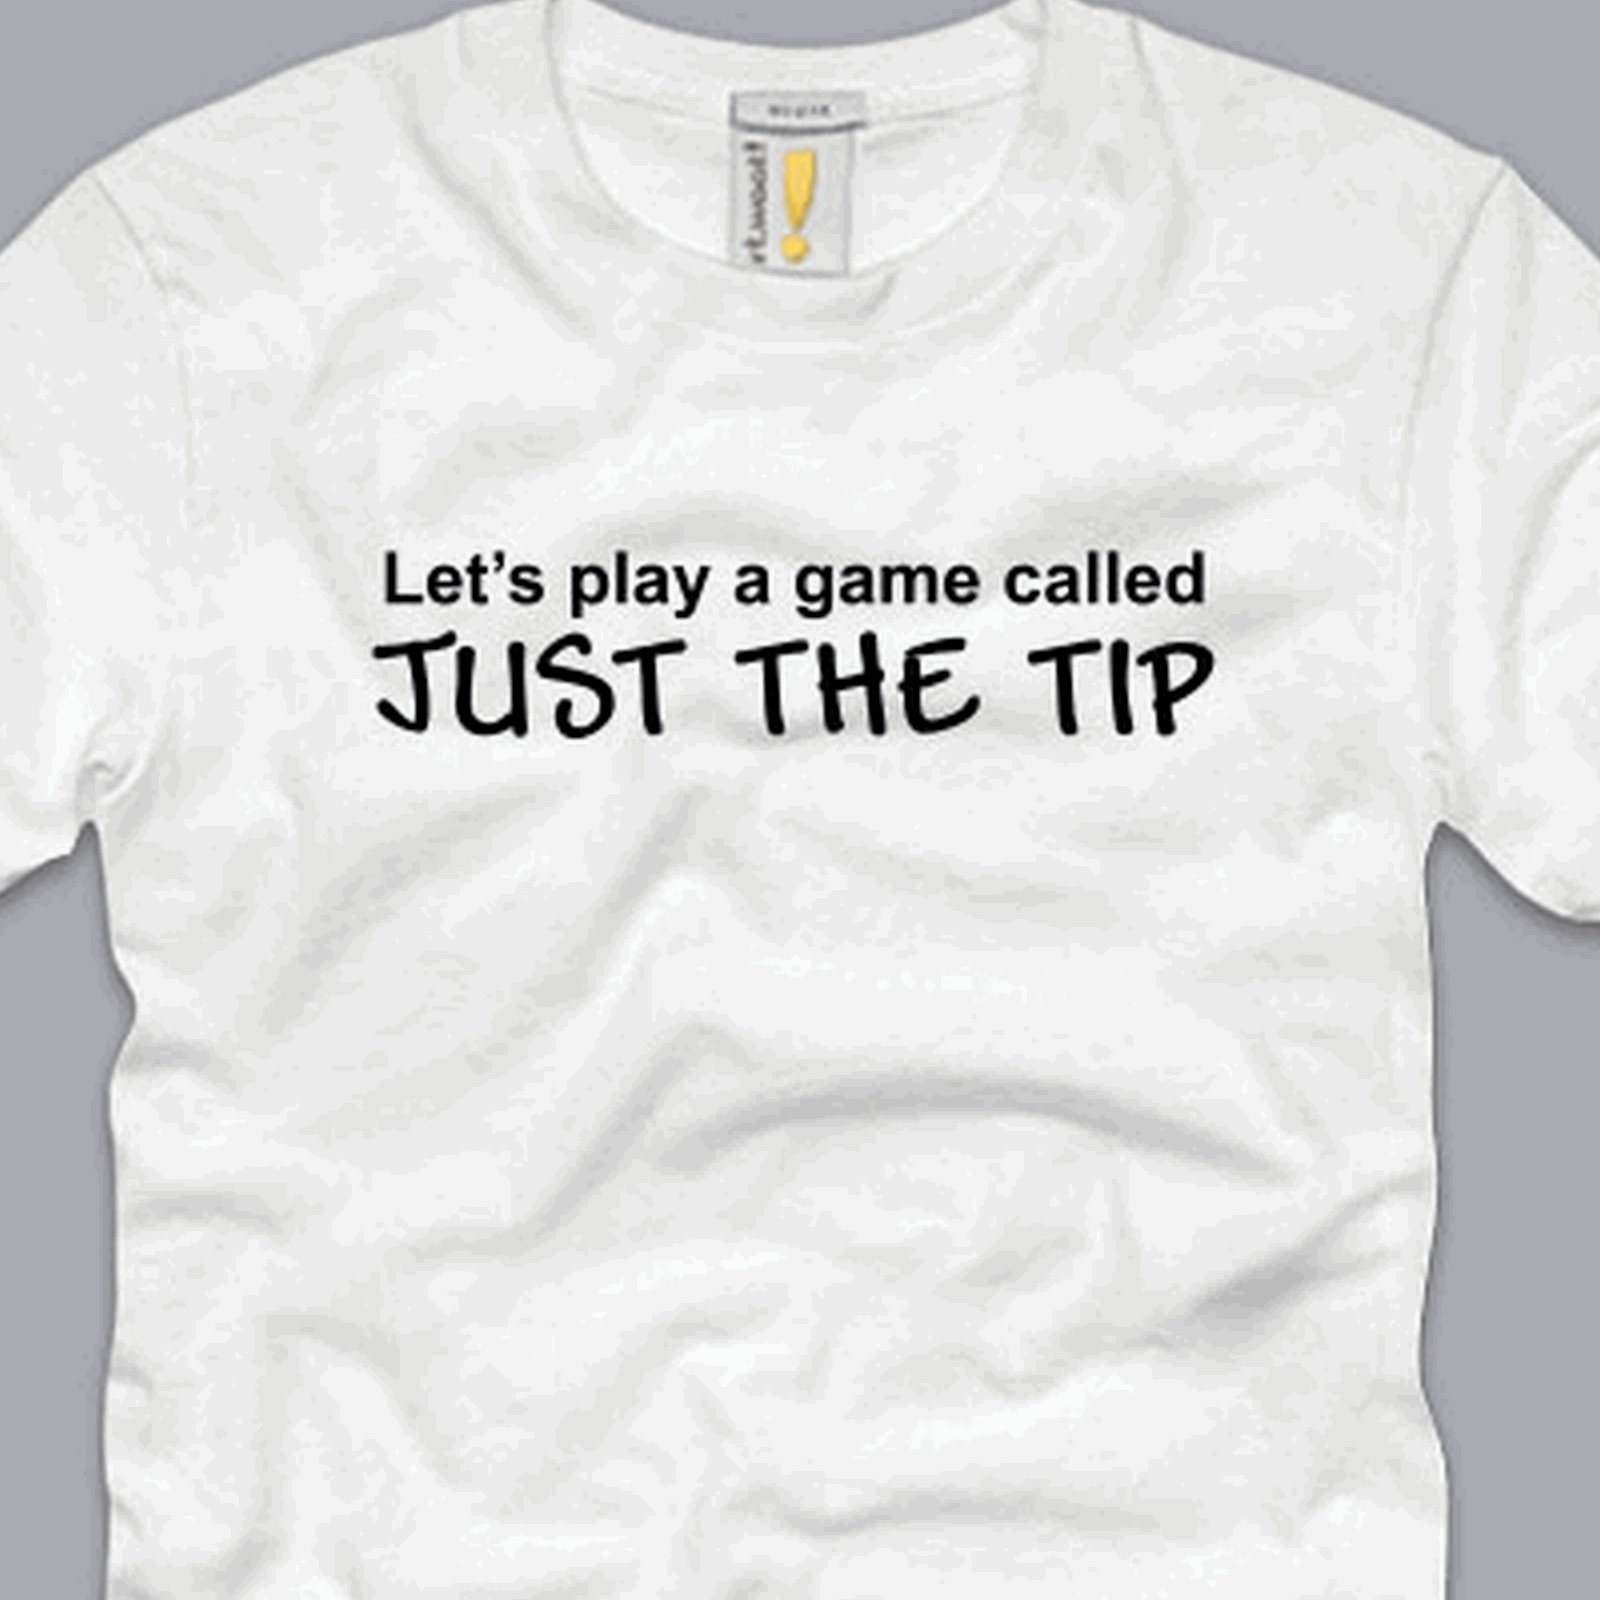 Just The Tip T Shirt 3xl Funny Adult Sex Sayings Humor Nerdy Awesome Tee Xxxl Ebay